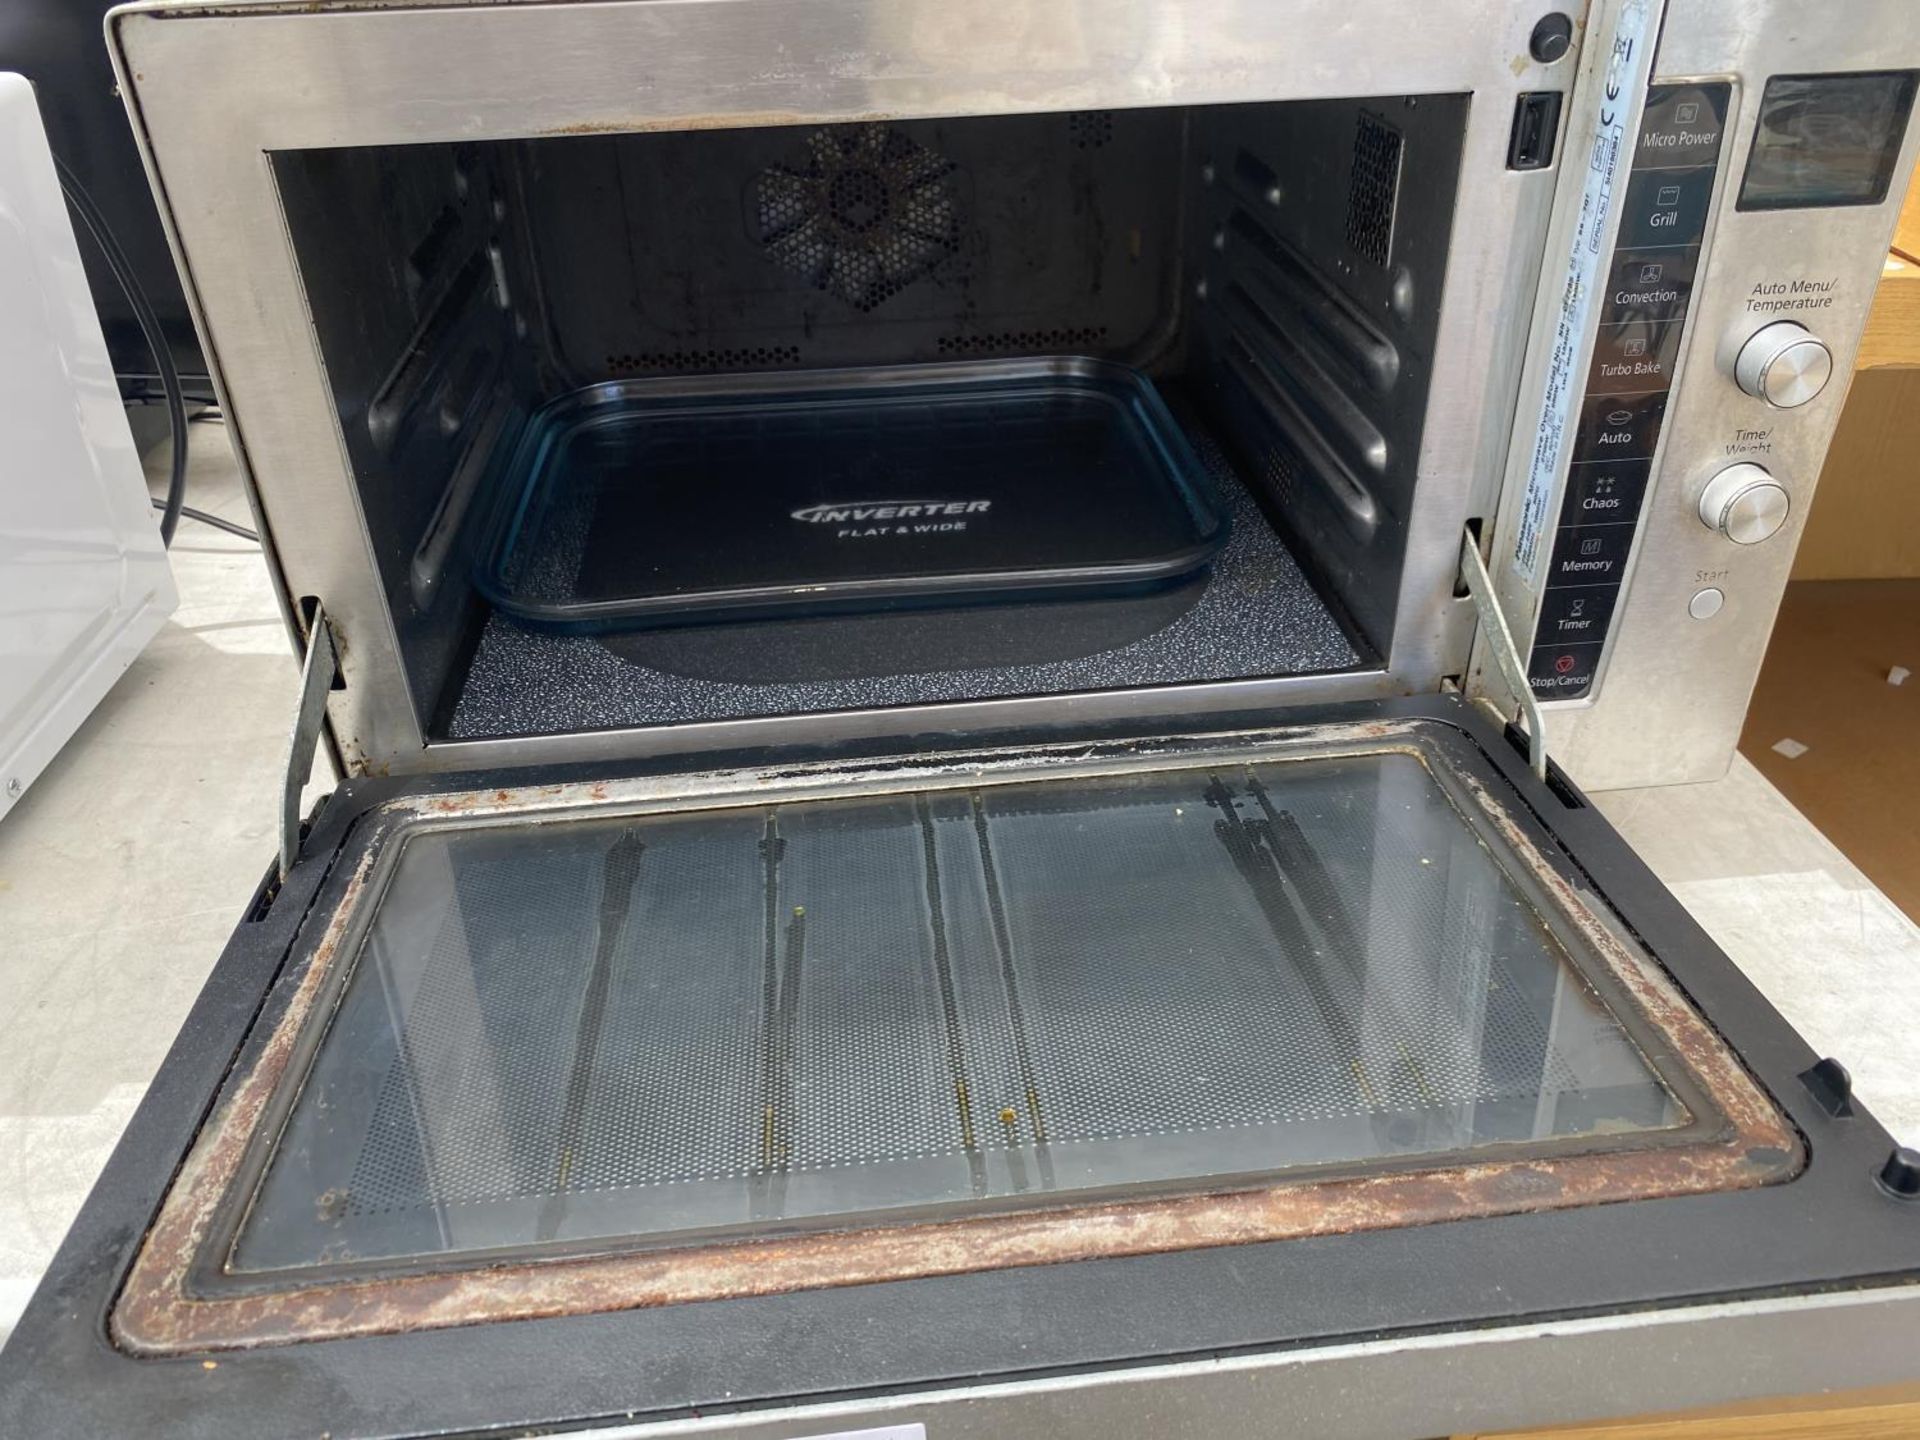 AN INDUSTRIAL STAINLESS STEEL INVERTER MICROWAVE - Image 2 of 2